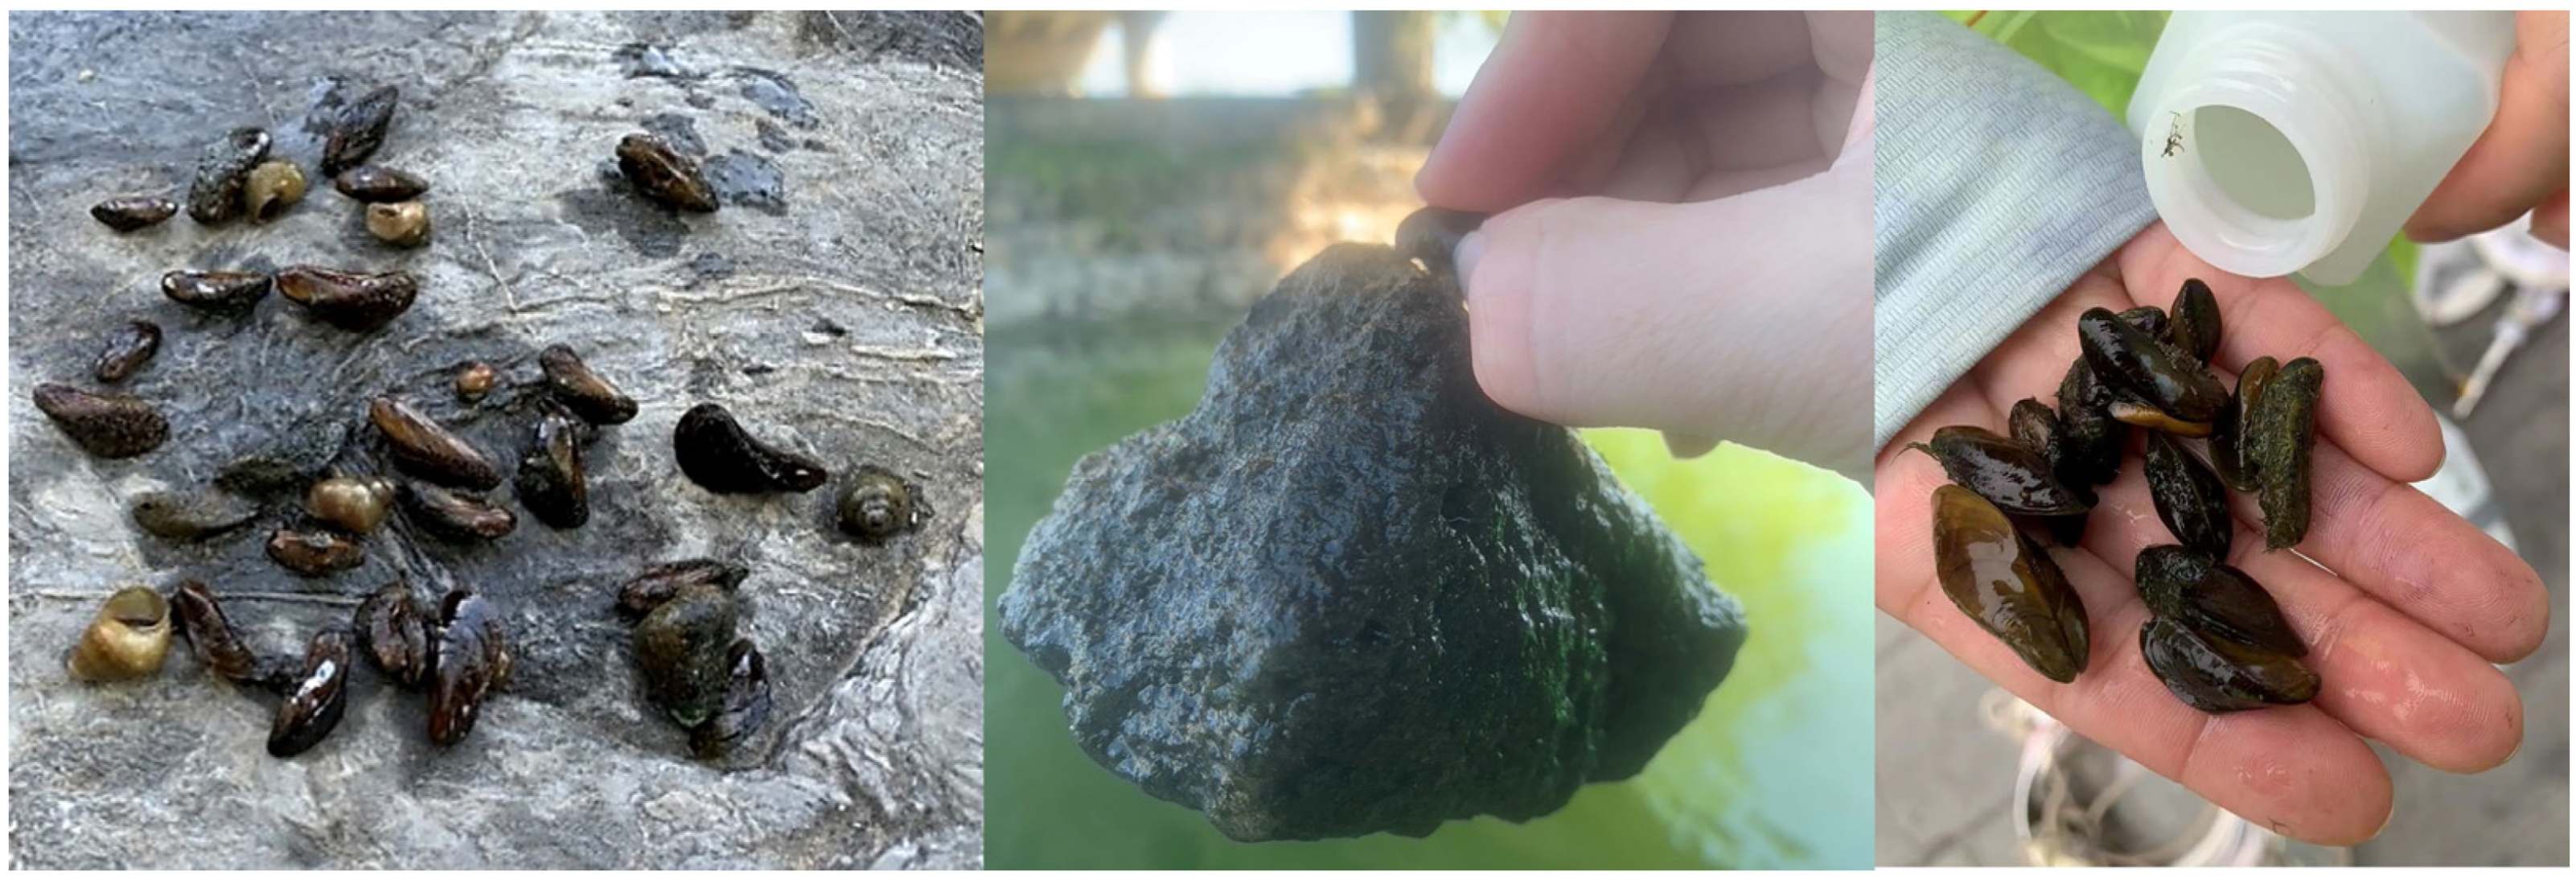 Early Detectors: A Summer of Mussel Monitoring - Invasive Species